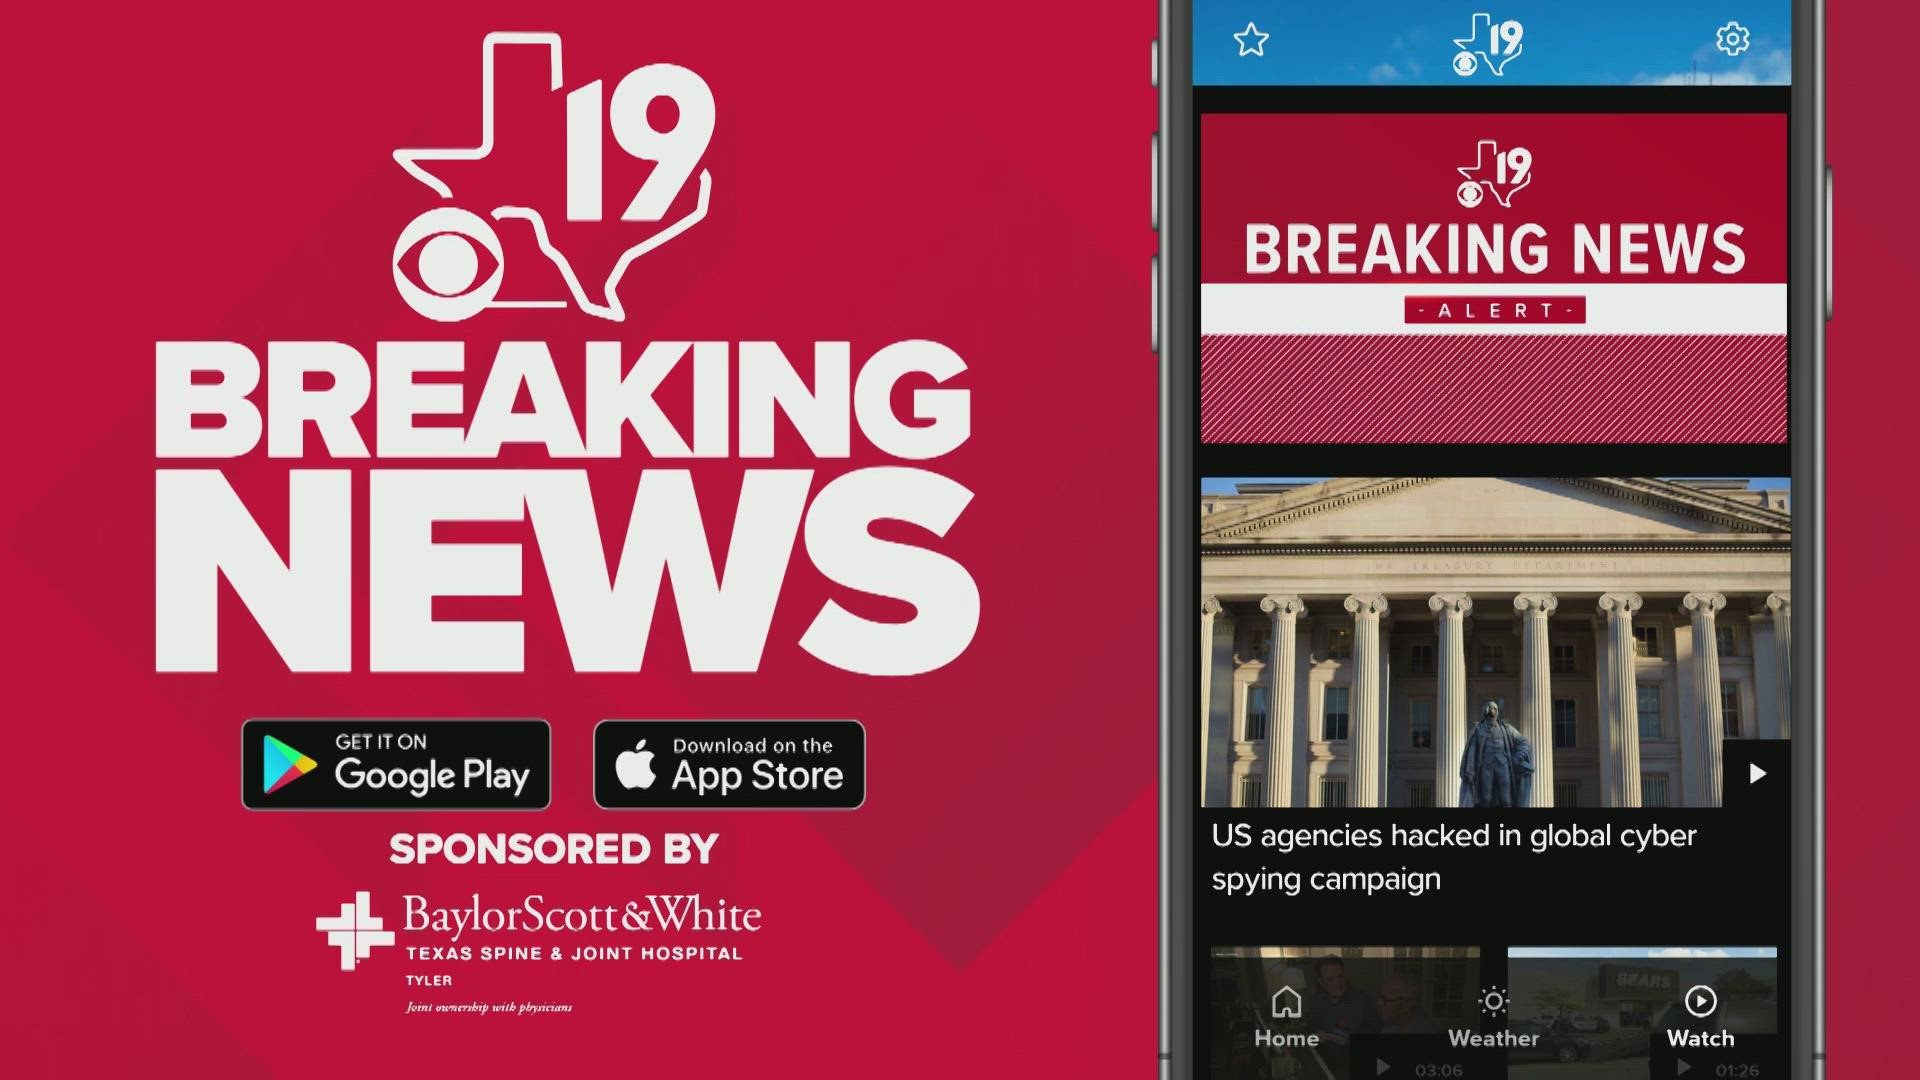 Download the free CBS19 mobile app to stay updated on the latest breaking news across East Texas.